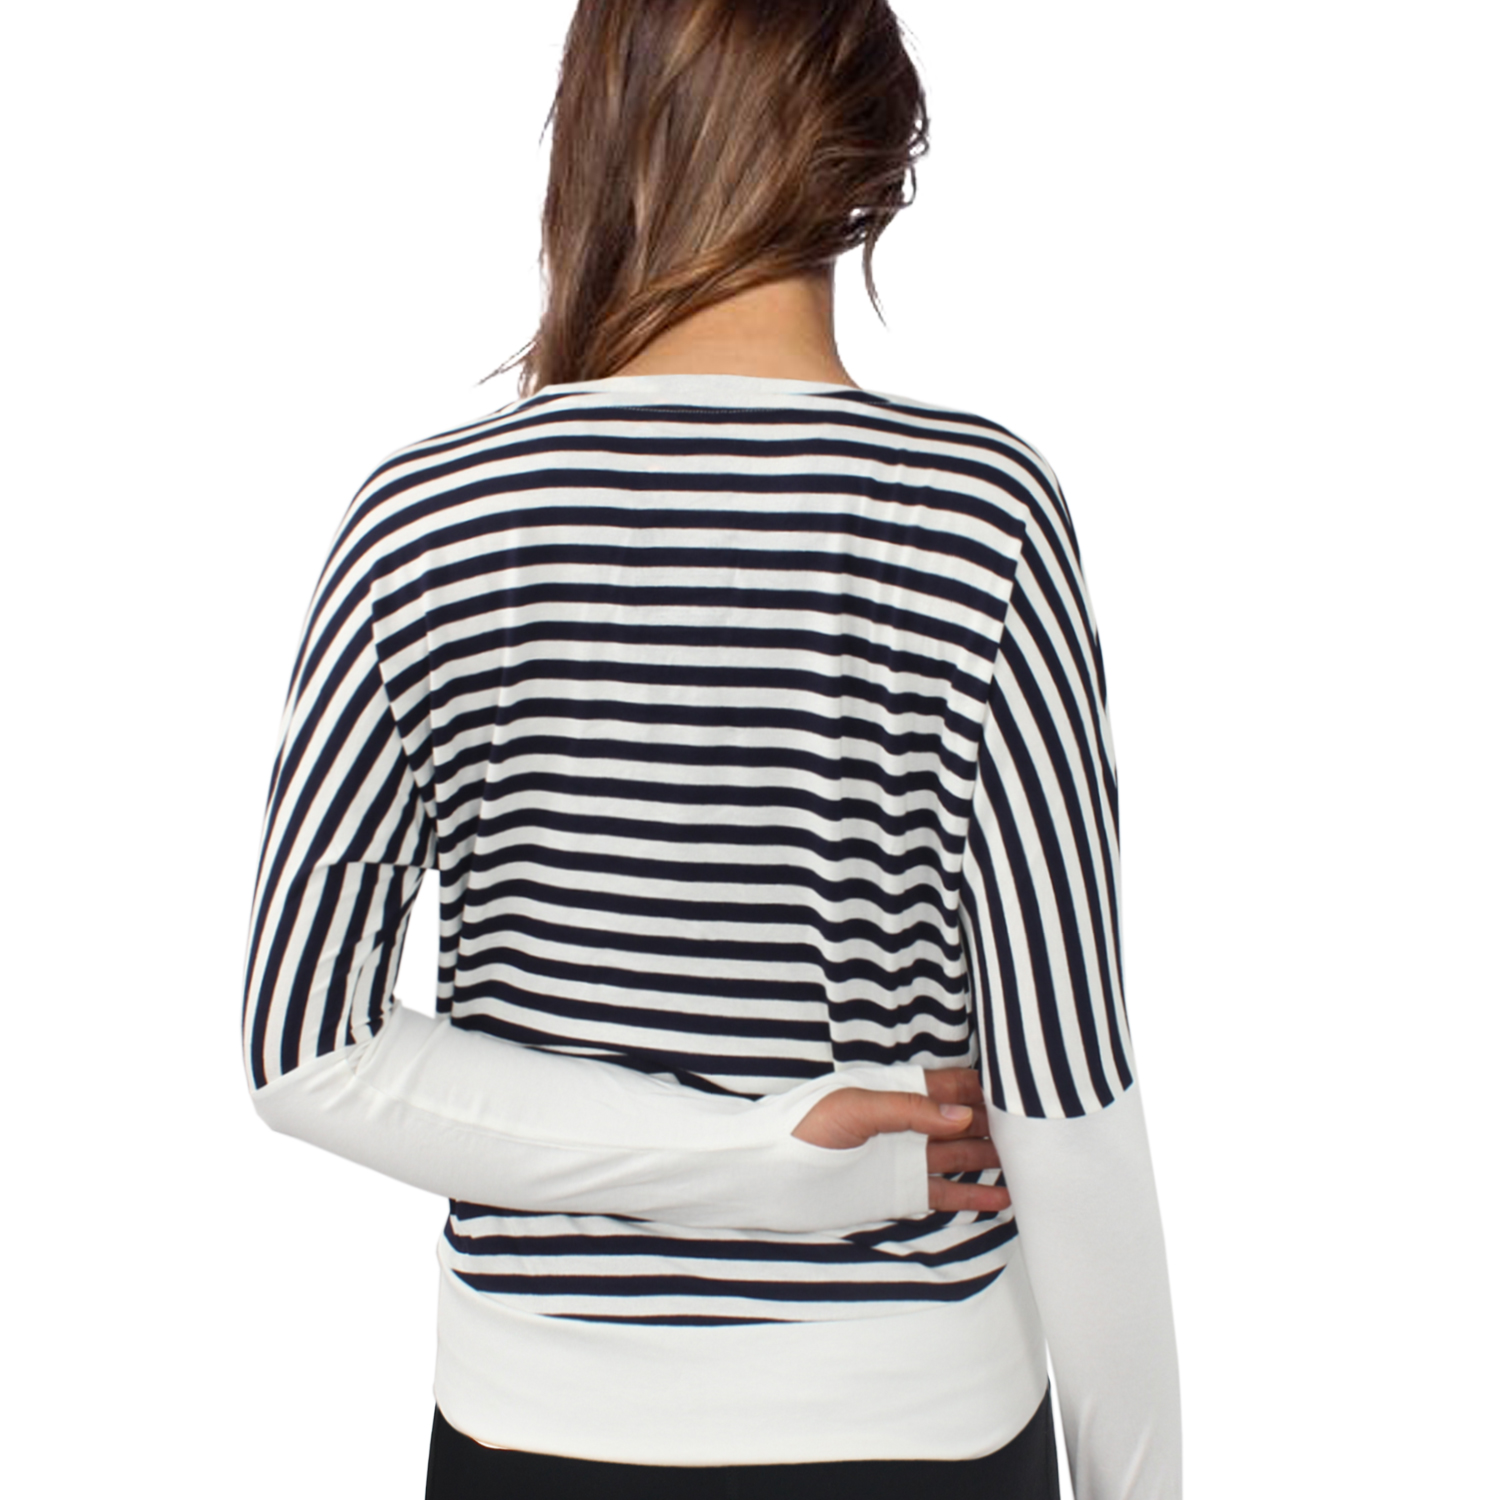 Women's Casual Batwing Sleeve Pullover Stripes Slim Fit Yoga Top Shirt